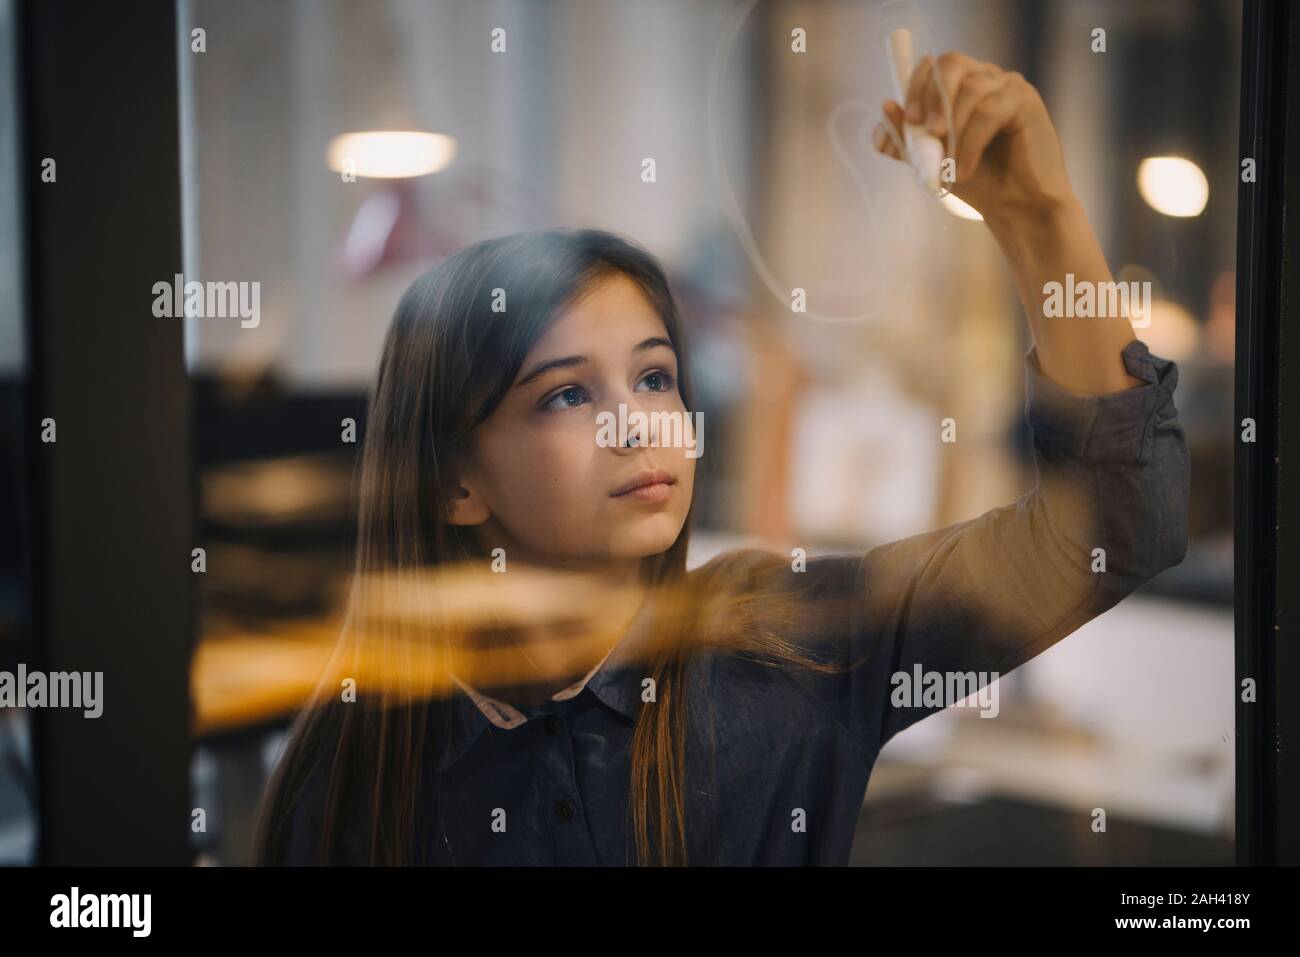 Girl drawing on glass pane in office Stock Photo